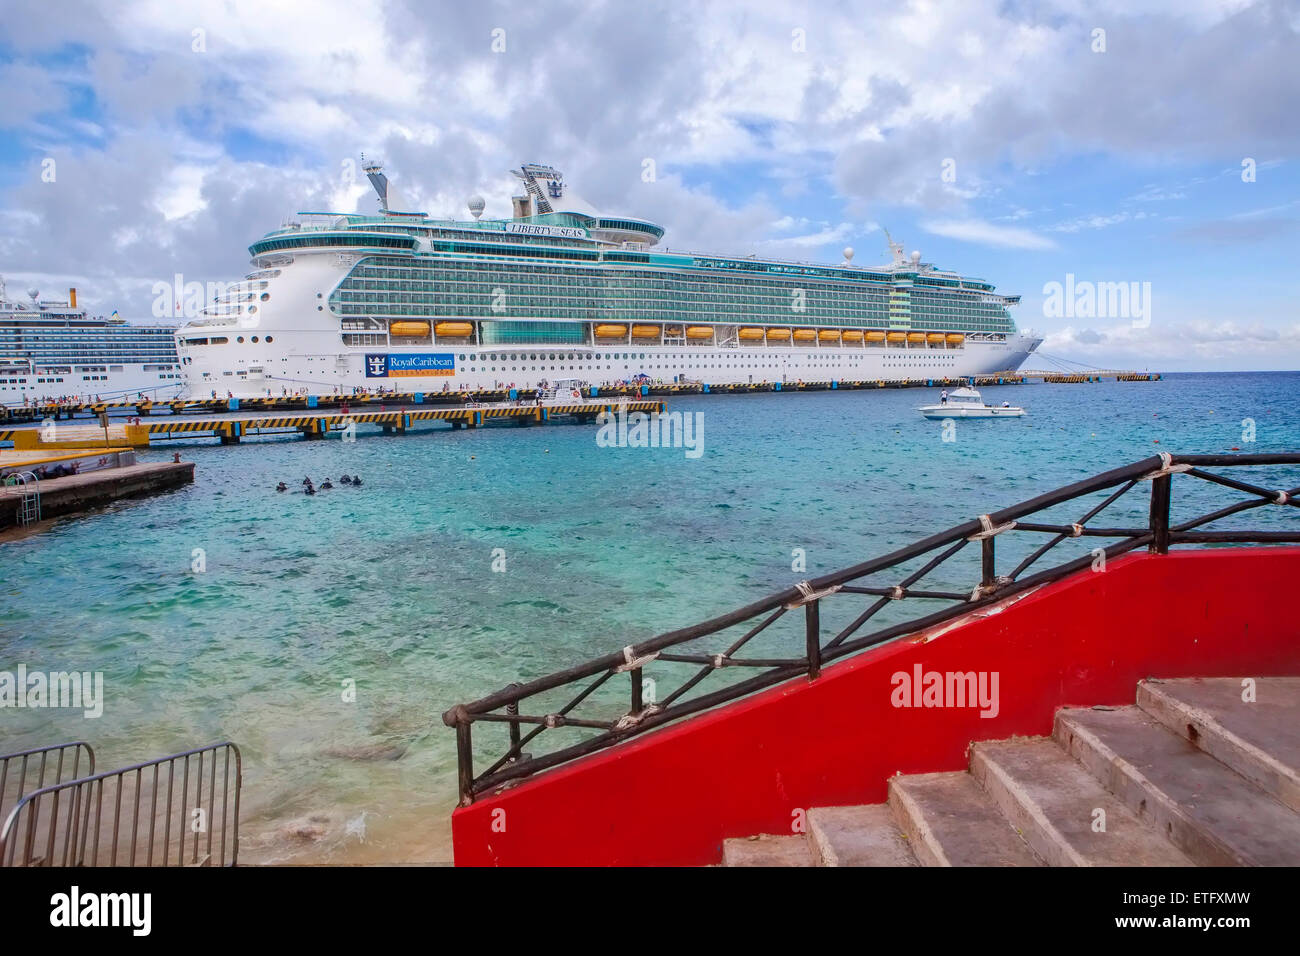 Liberty-class luxury cruise ship, Liberty of the Seas, at port docked at the port in Cozumel, Mexico. Passengers walk on dock. Stock Photo